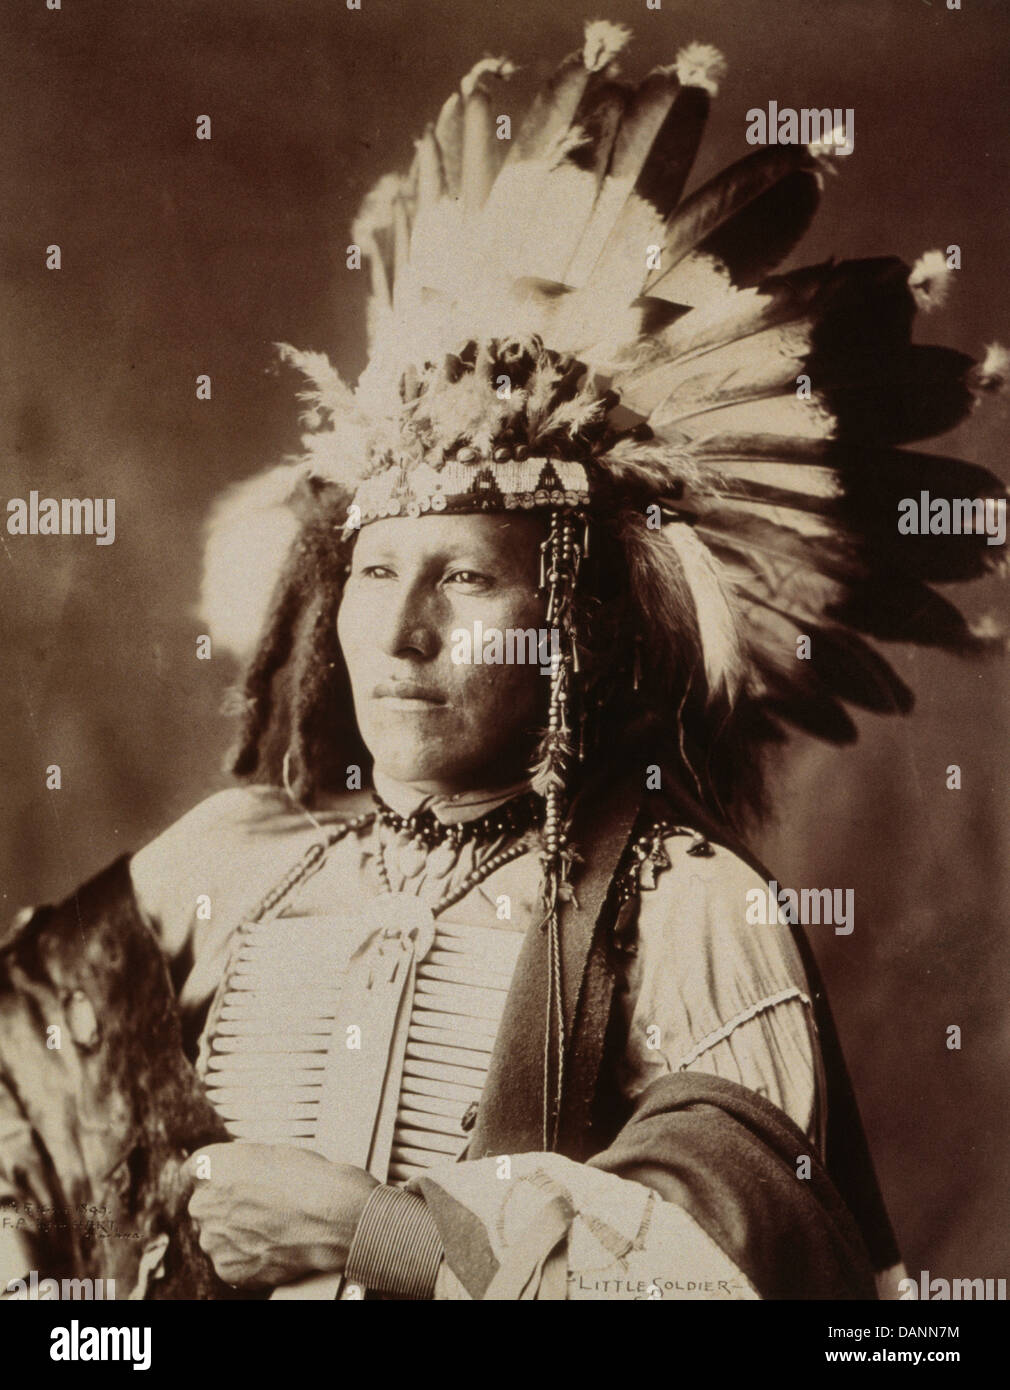 Little Soldier, half-length portrait, facing left, wearing breastplate and war bonnet, Sioux Warrior, circa 1899 Stock Photo